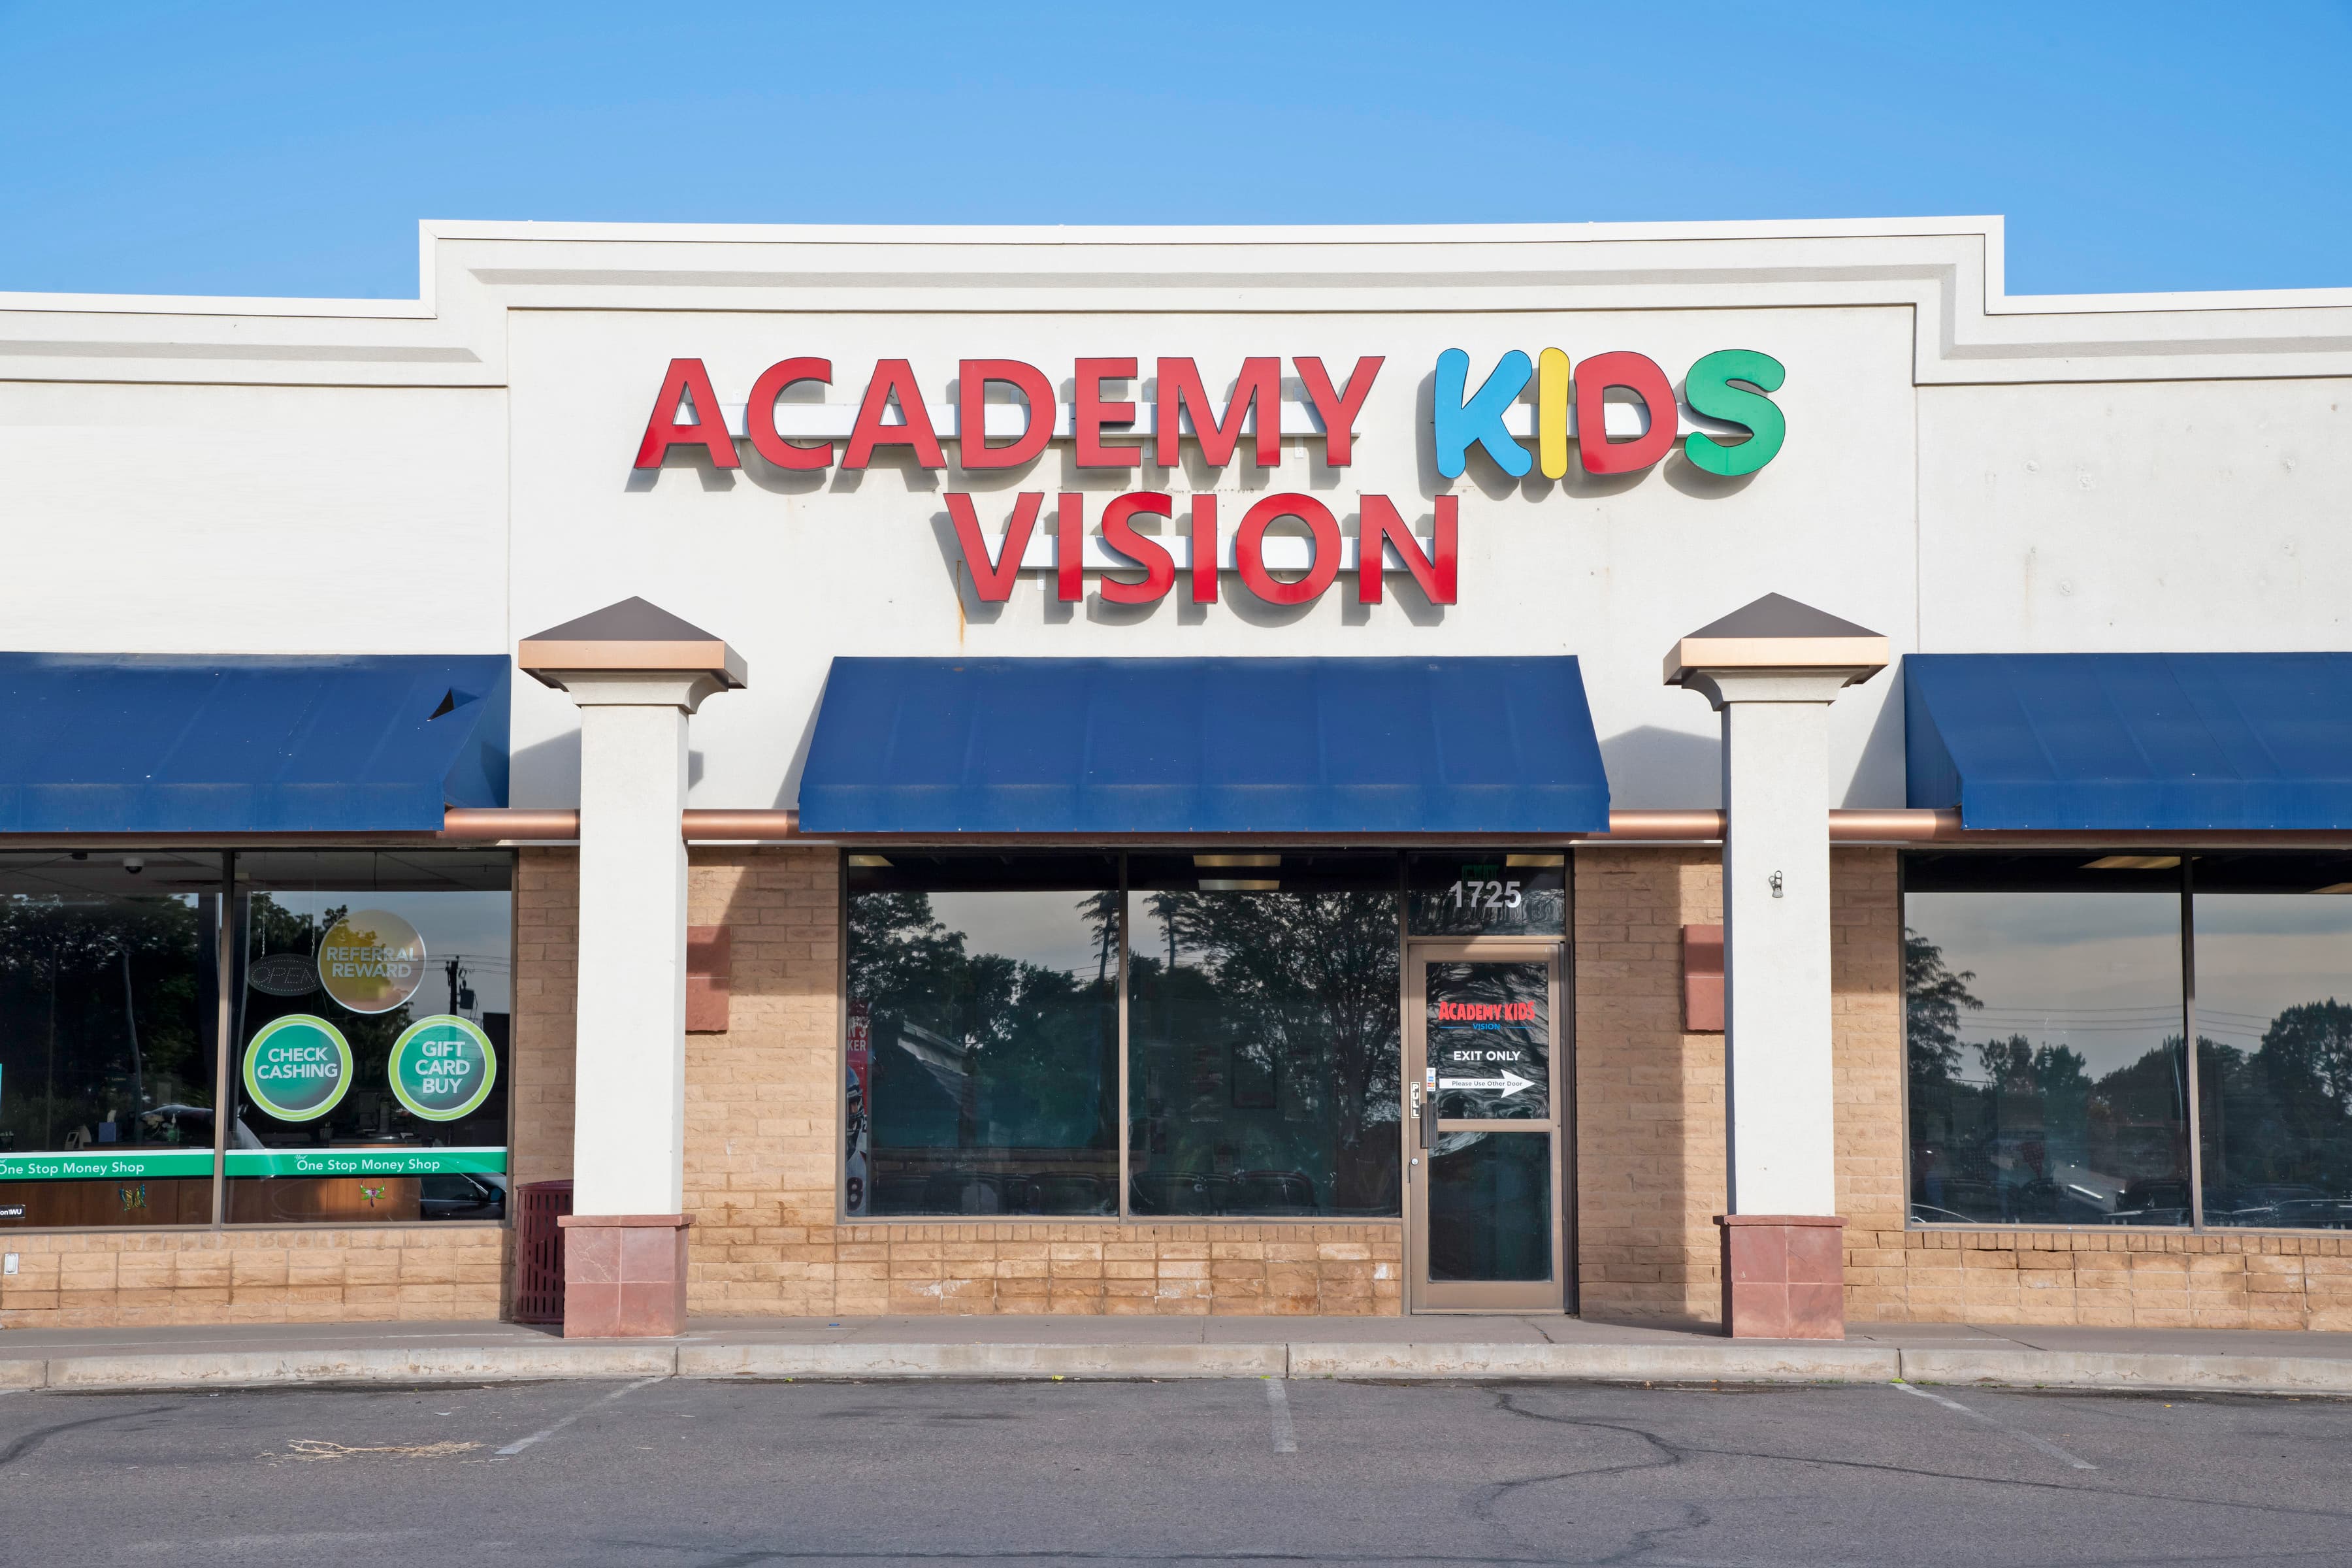 exterior of building that has a colorful sign that says Academy Kids Vision